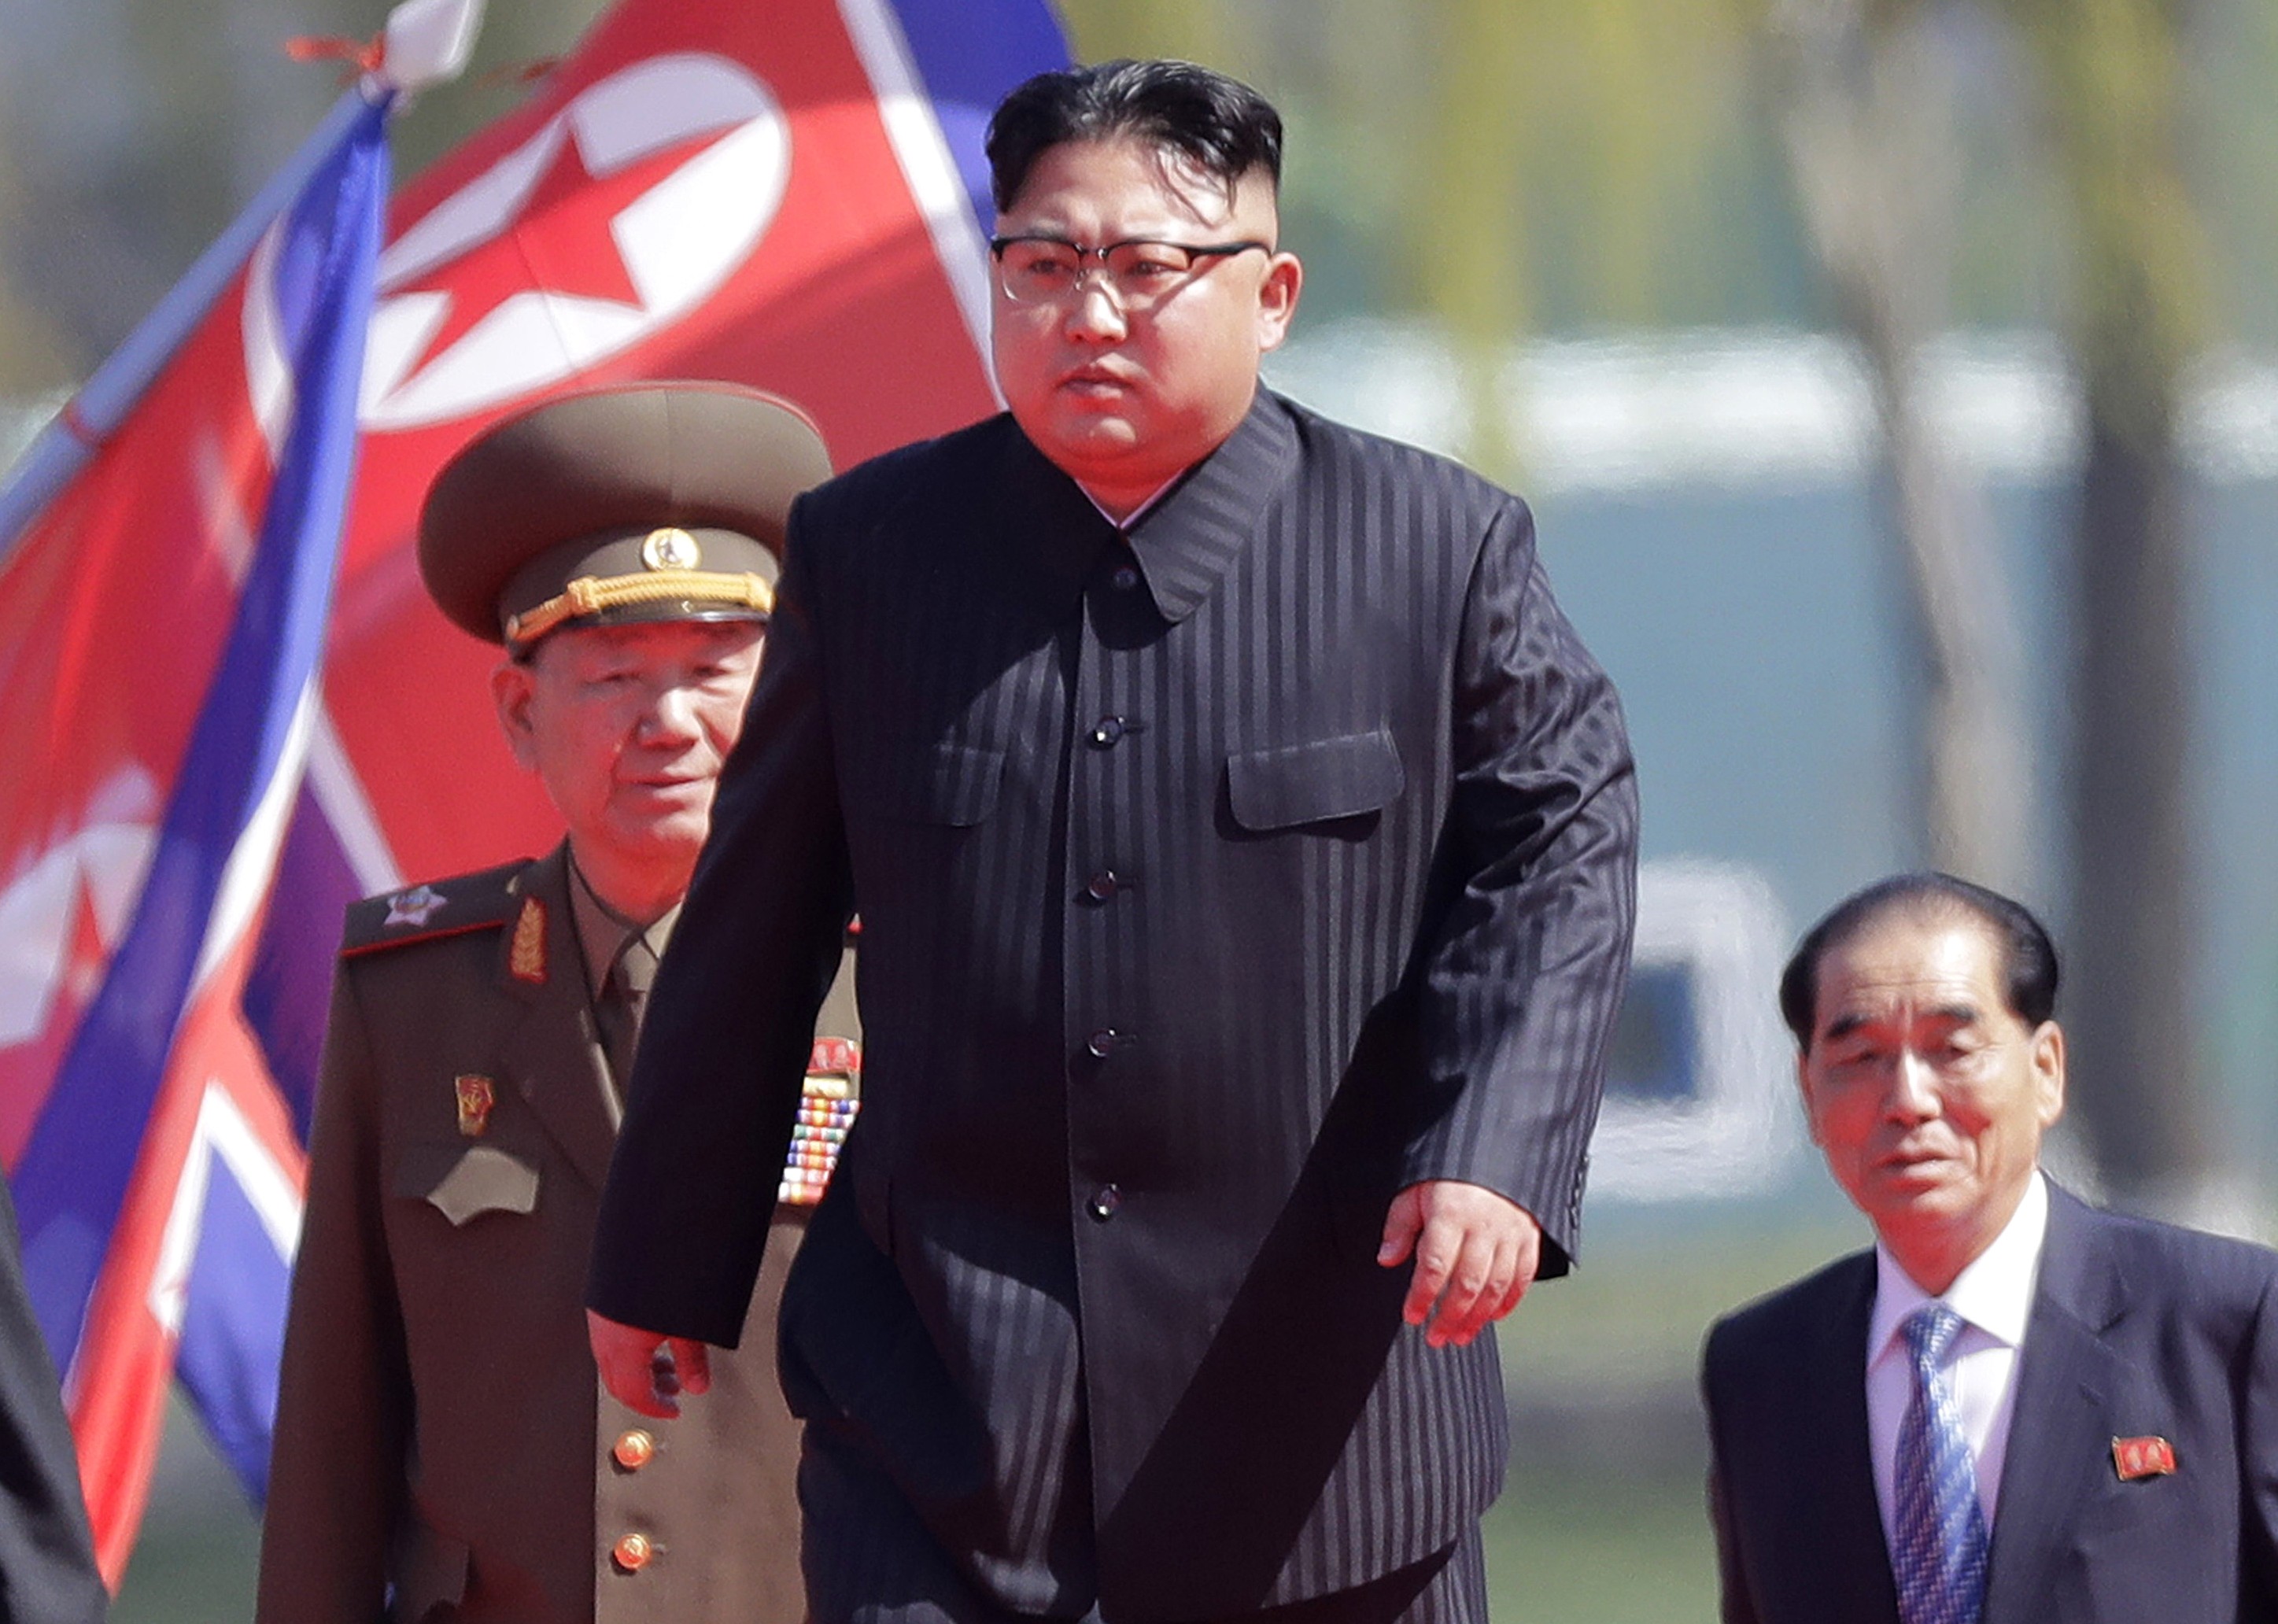 North Korean leader Kim Jong-un arrives at the official opening of the Ryomyong residential area in Pyongyang, on April 13. In considering his options, Kim must prefer the fate of a previous ruthless dictator, Idi Amin, who died of old age in Saudi Arabia, to that of Nicolae Ceausescu, Muammar Gaddafi or Benito Mussolini – all killed at the hands of their own people – or Saddam Hussein, snuffed out after an American invasion. Photo: AP